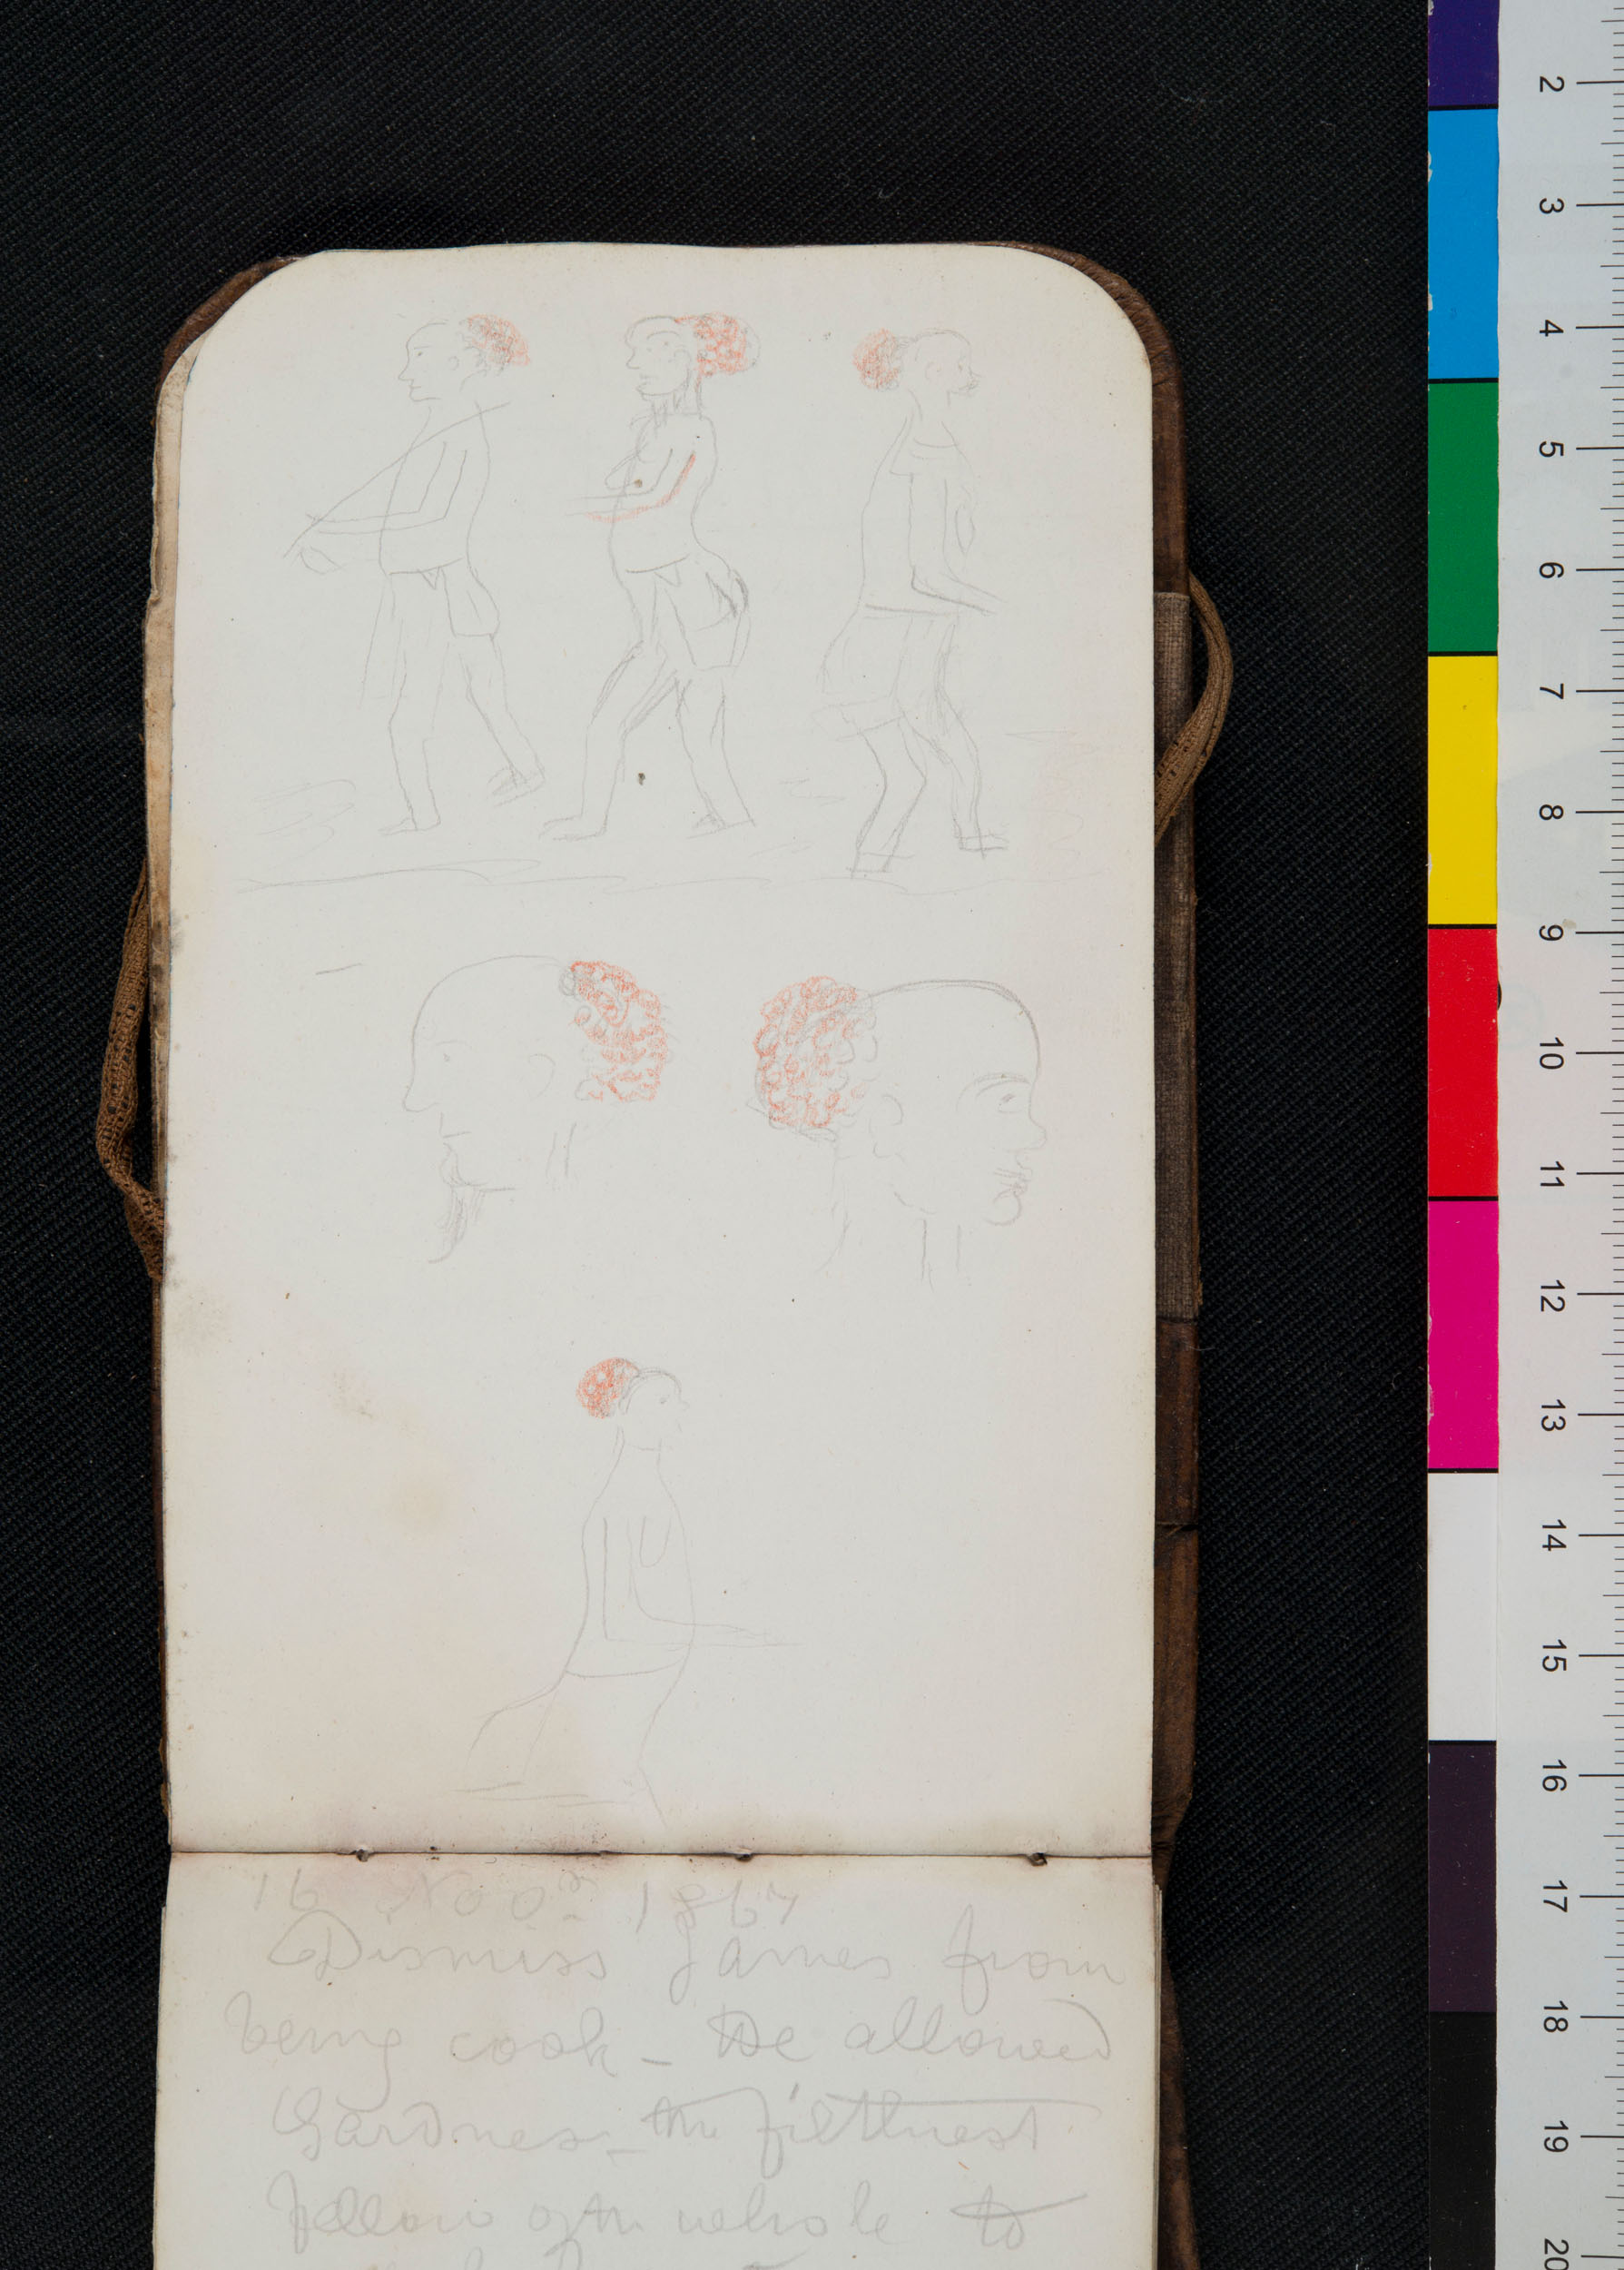 An image of a page of Field Diary X (Livingstone 1867c:[129]). Copyright David Livingstone Centre. Creative Commons Attribution-NonCommercial 3.0 Unported (https://creativecommons.org/licenses/by-nc/3.0/).